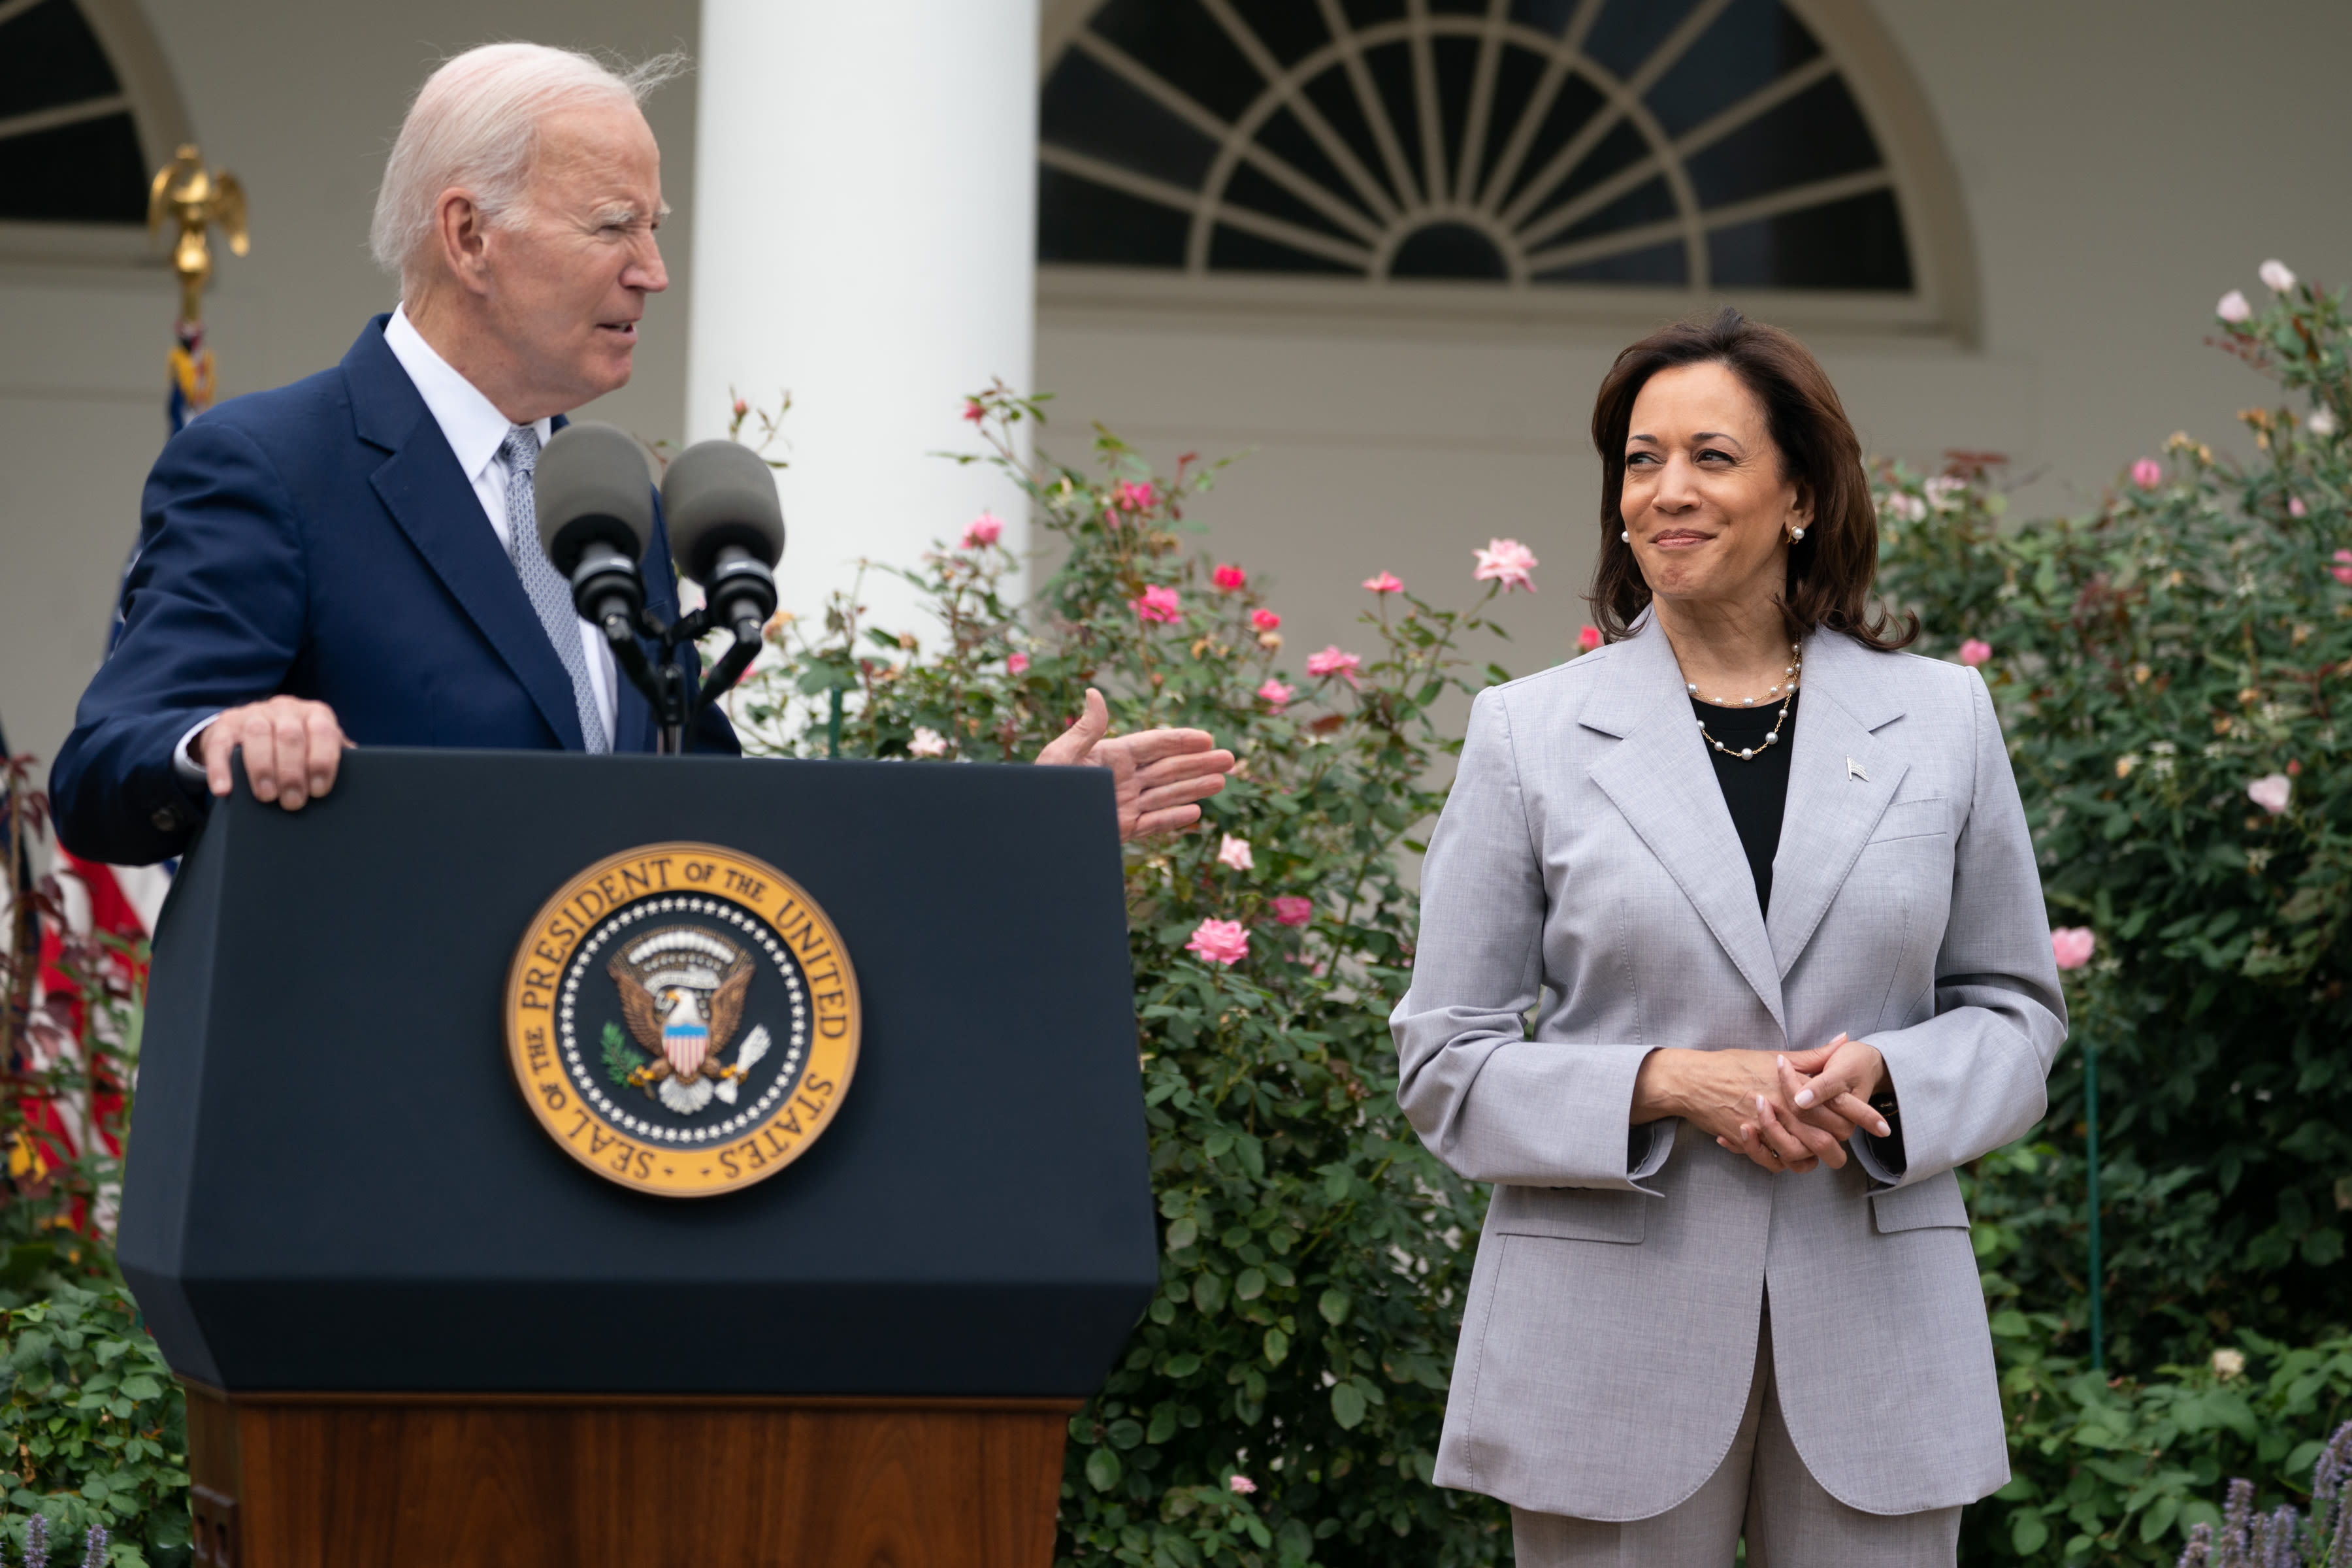 Opinion | Harris’s electoral path will probably be more like Biden’s than Obama’s